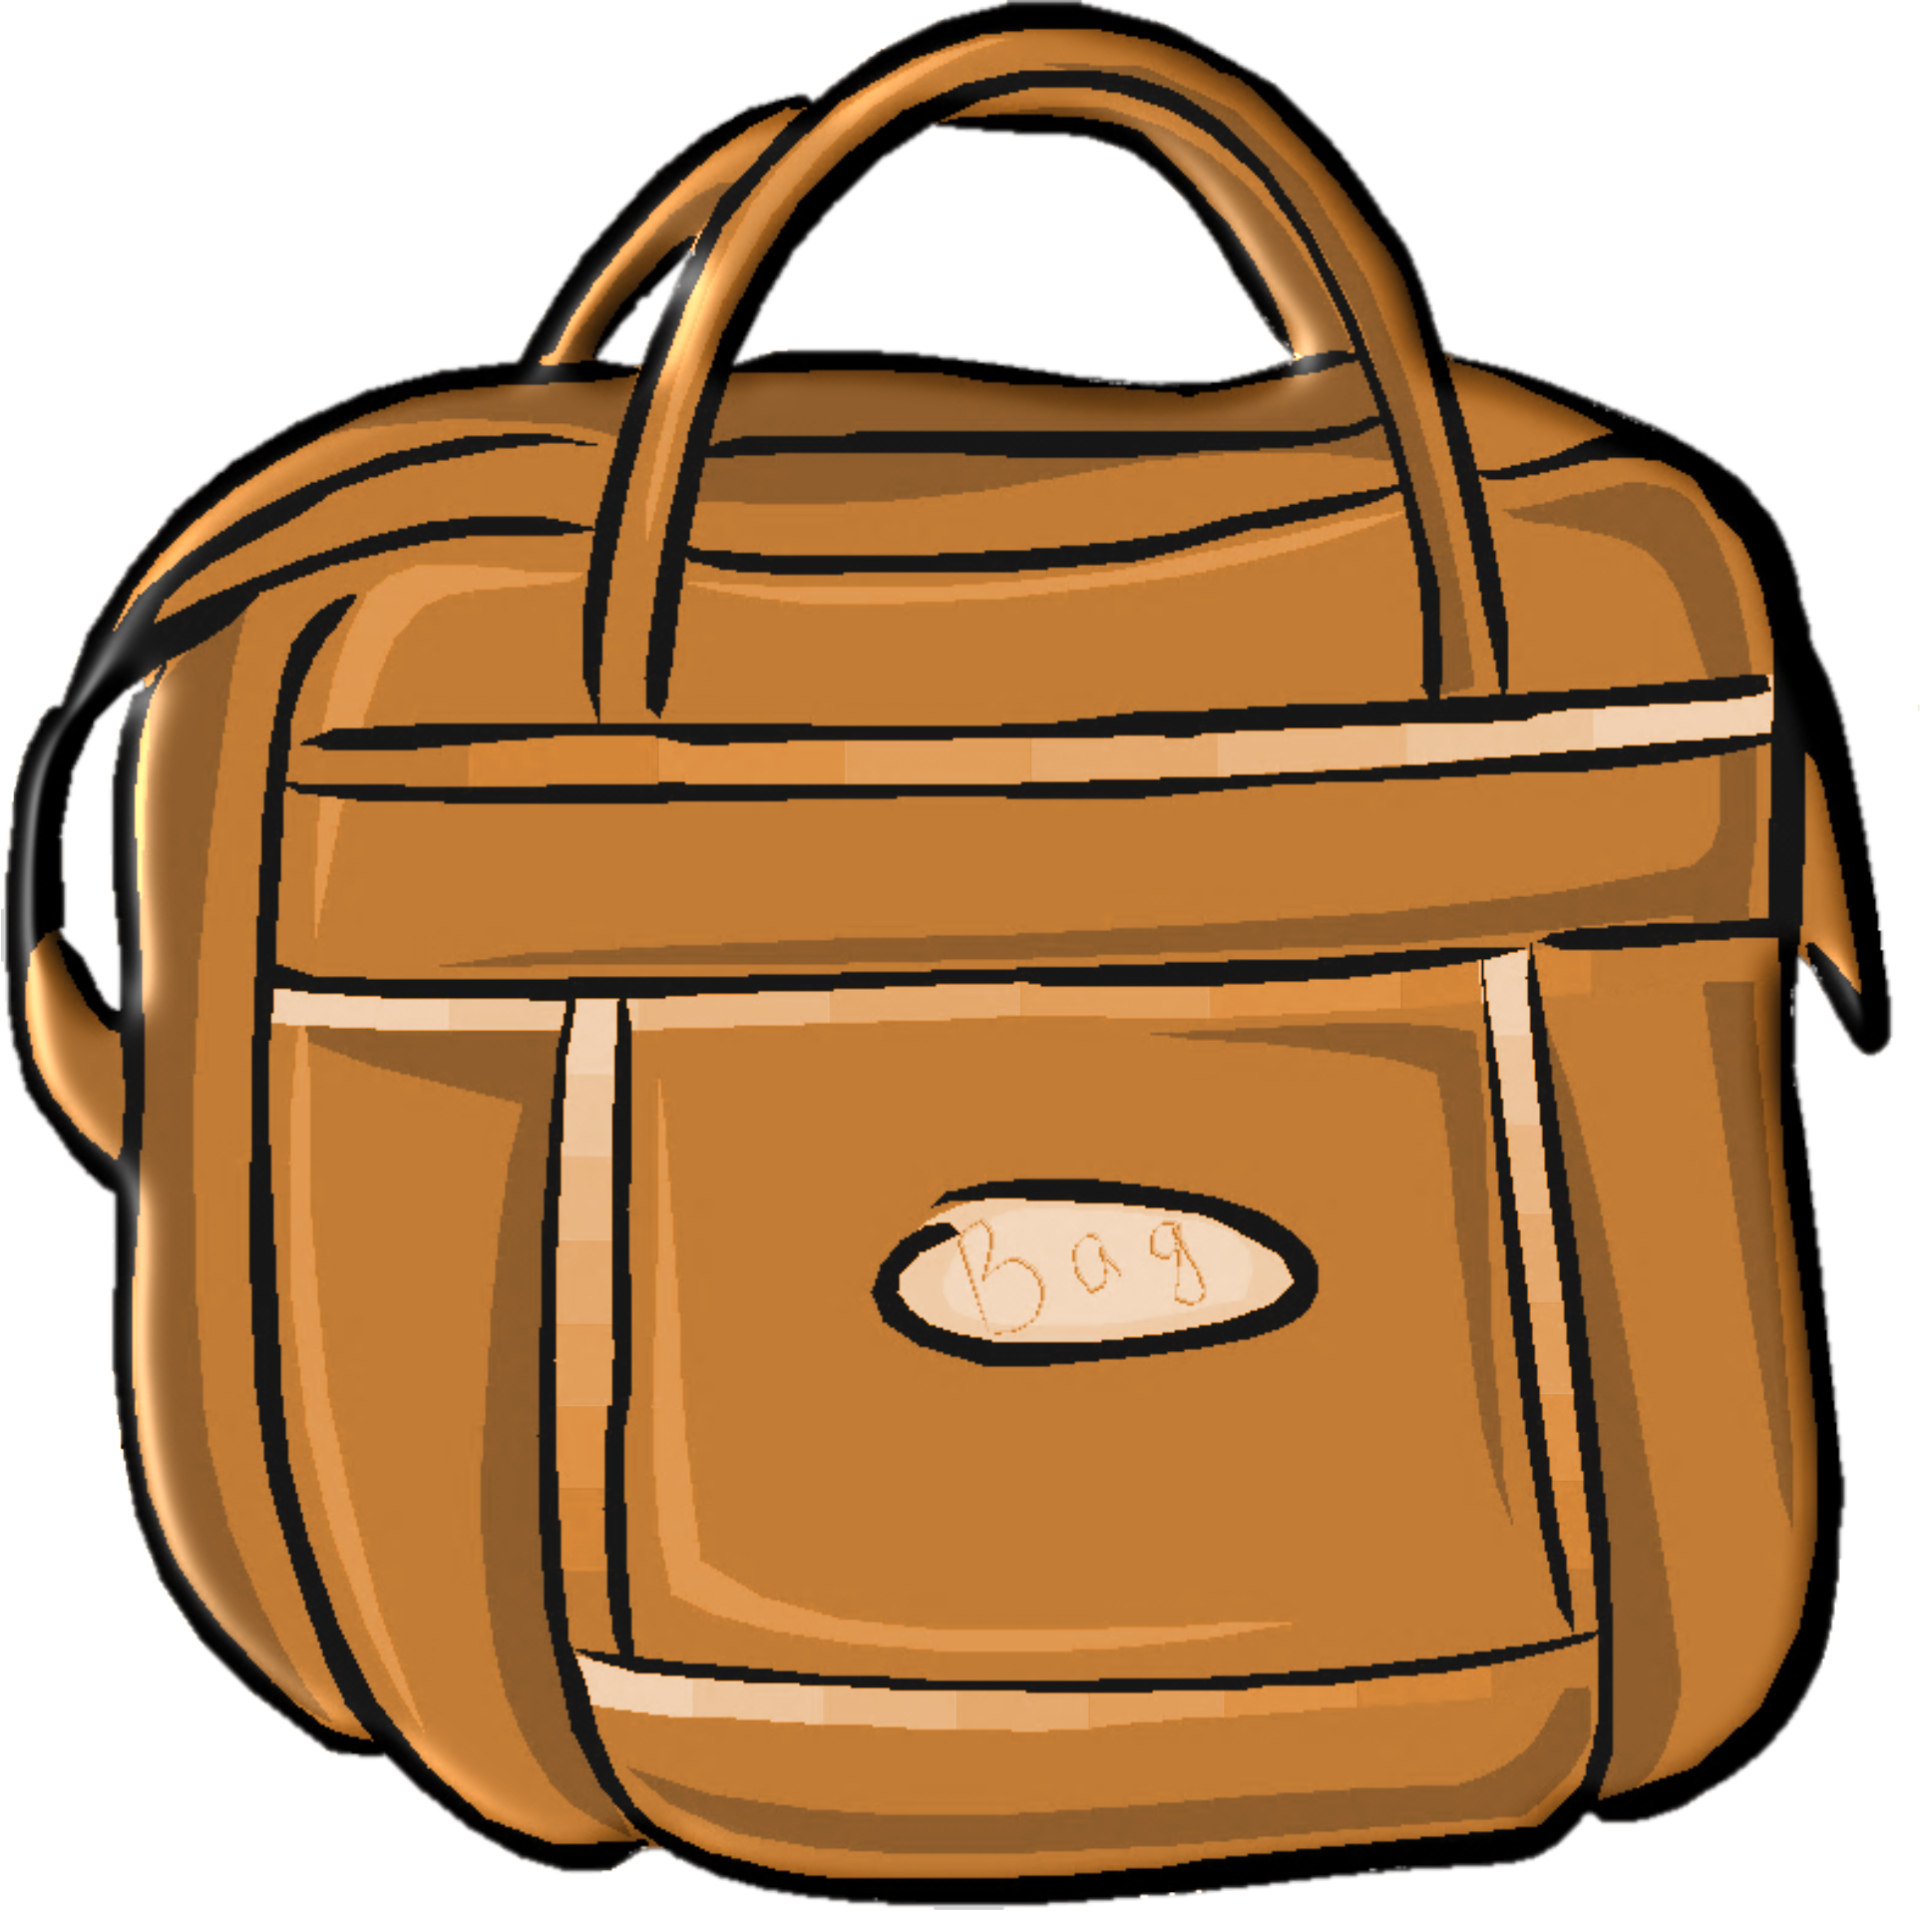 Download and share clipart about Ladies Bag, Object, Graphic, Brown, Bag, H...